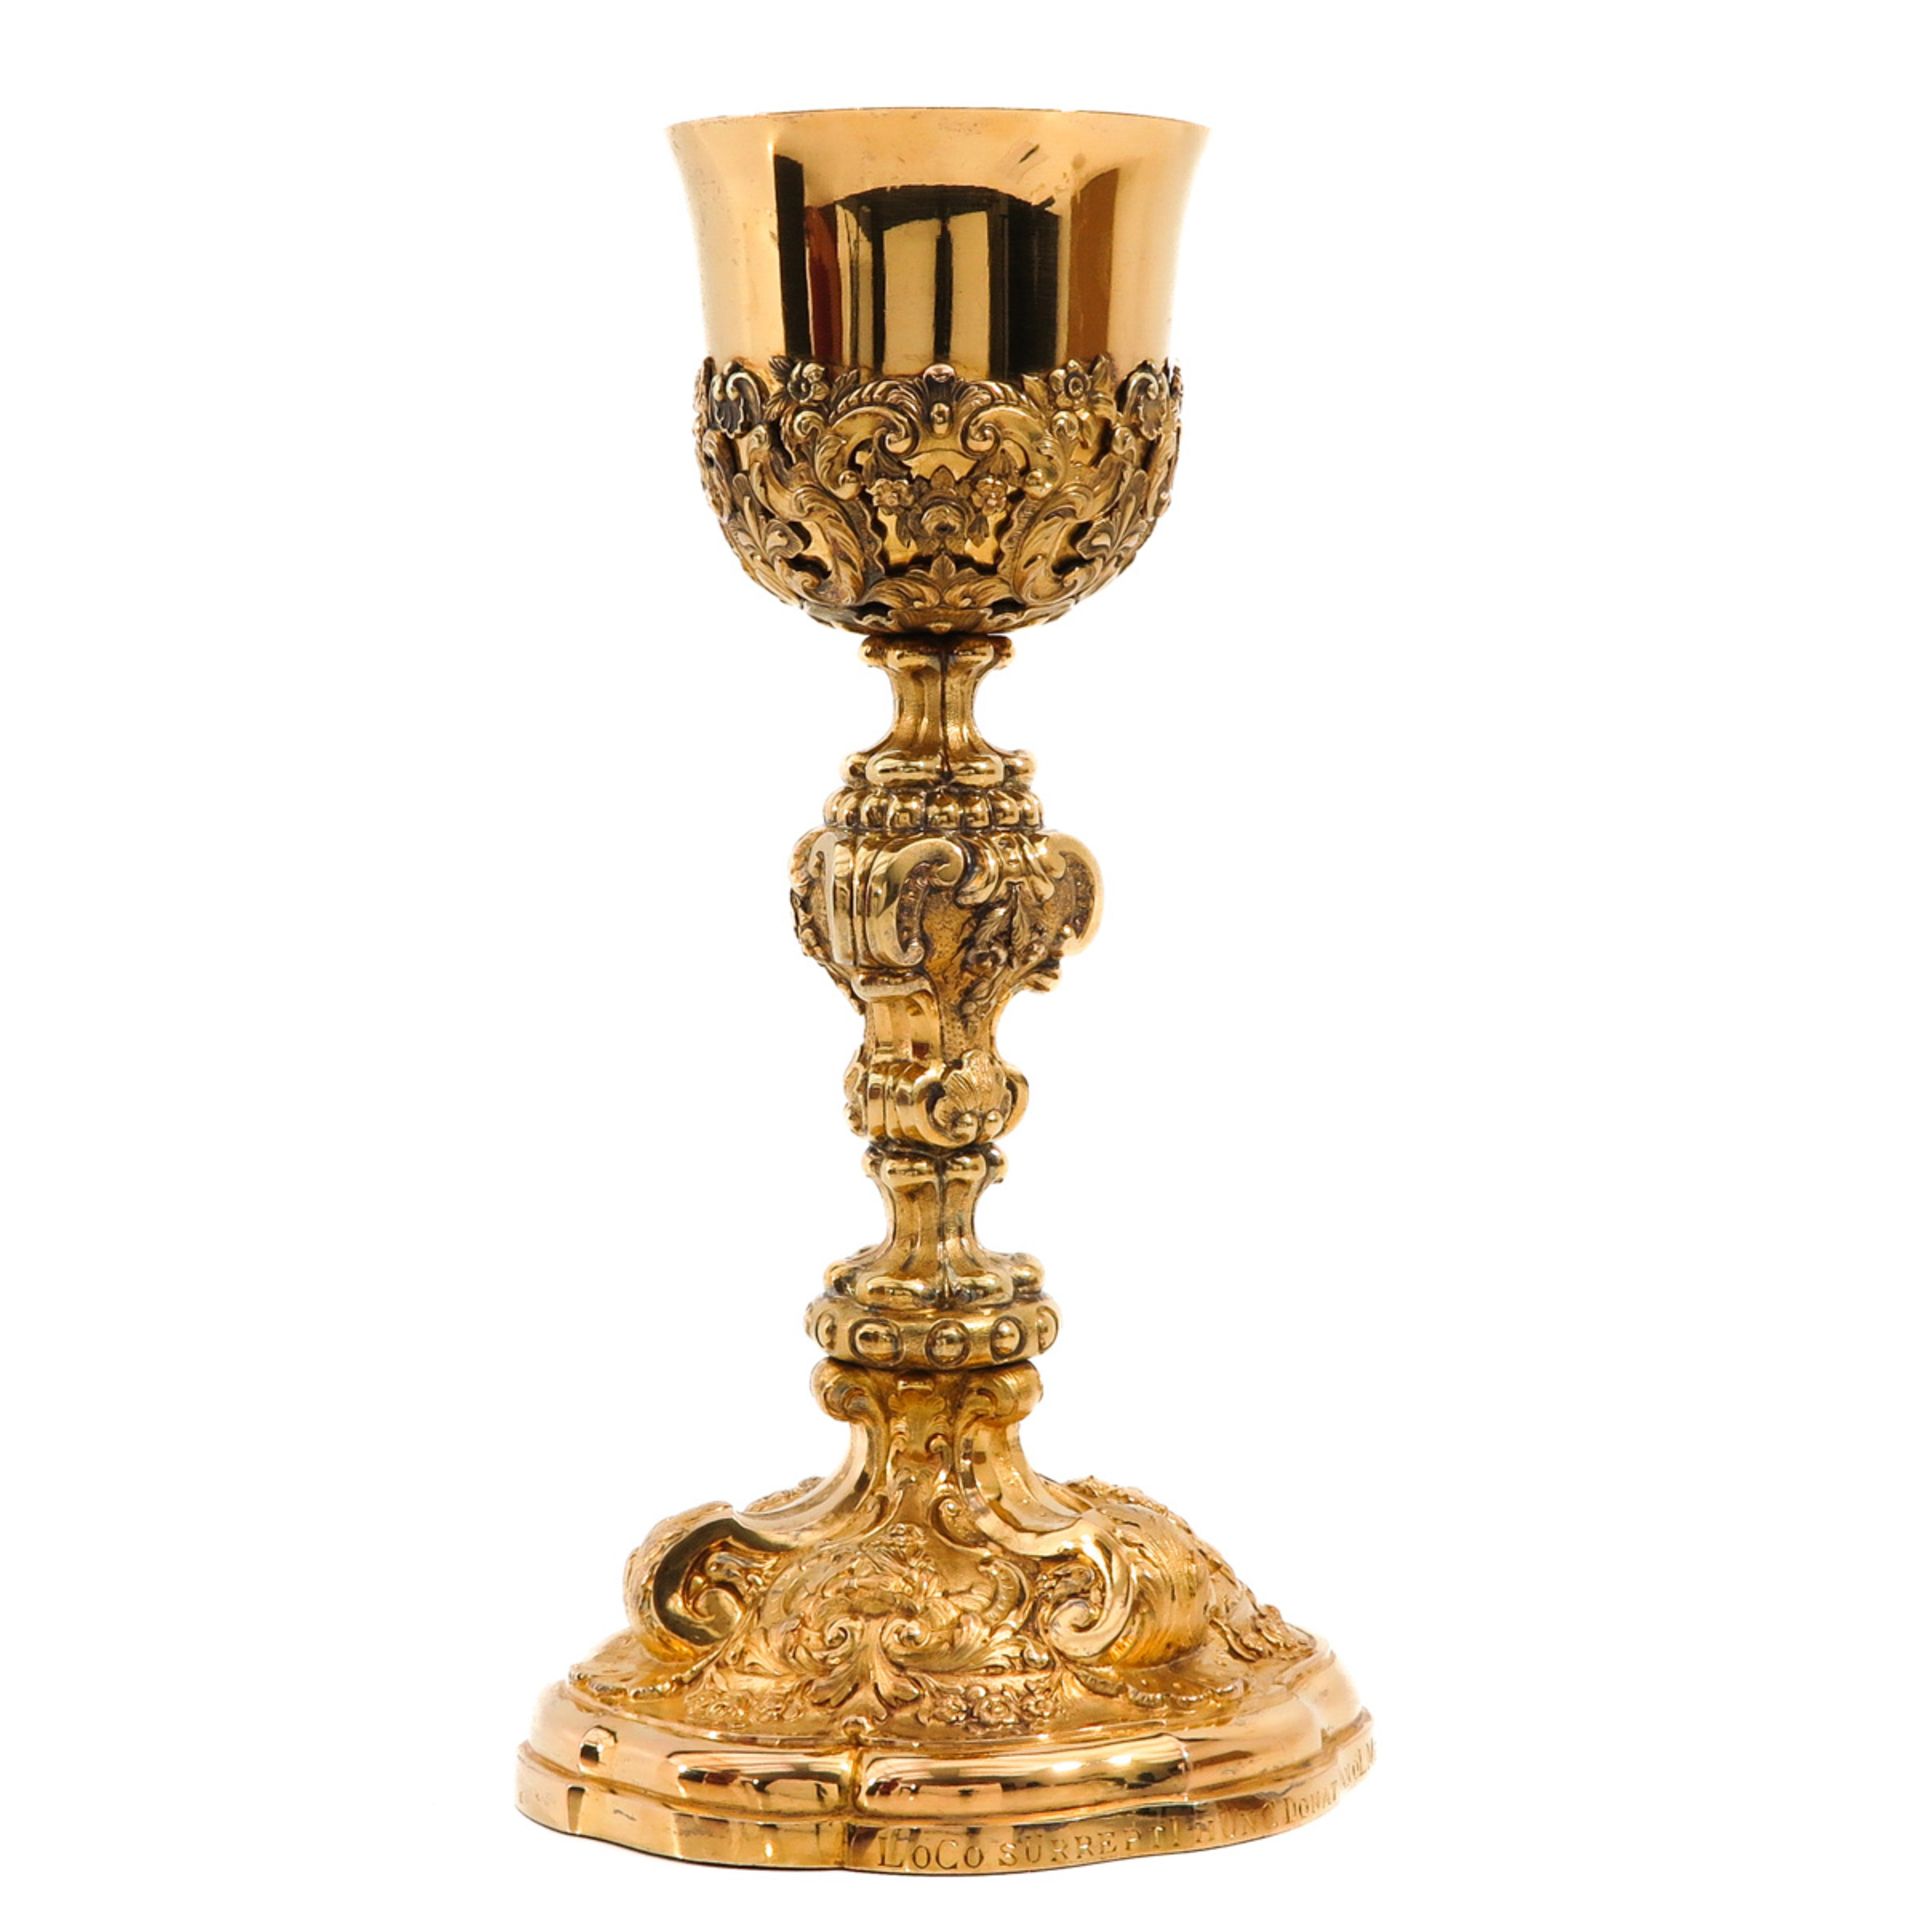 A Very Large 19th Century Gold Plated Silver Chalice - Image 4 of 10